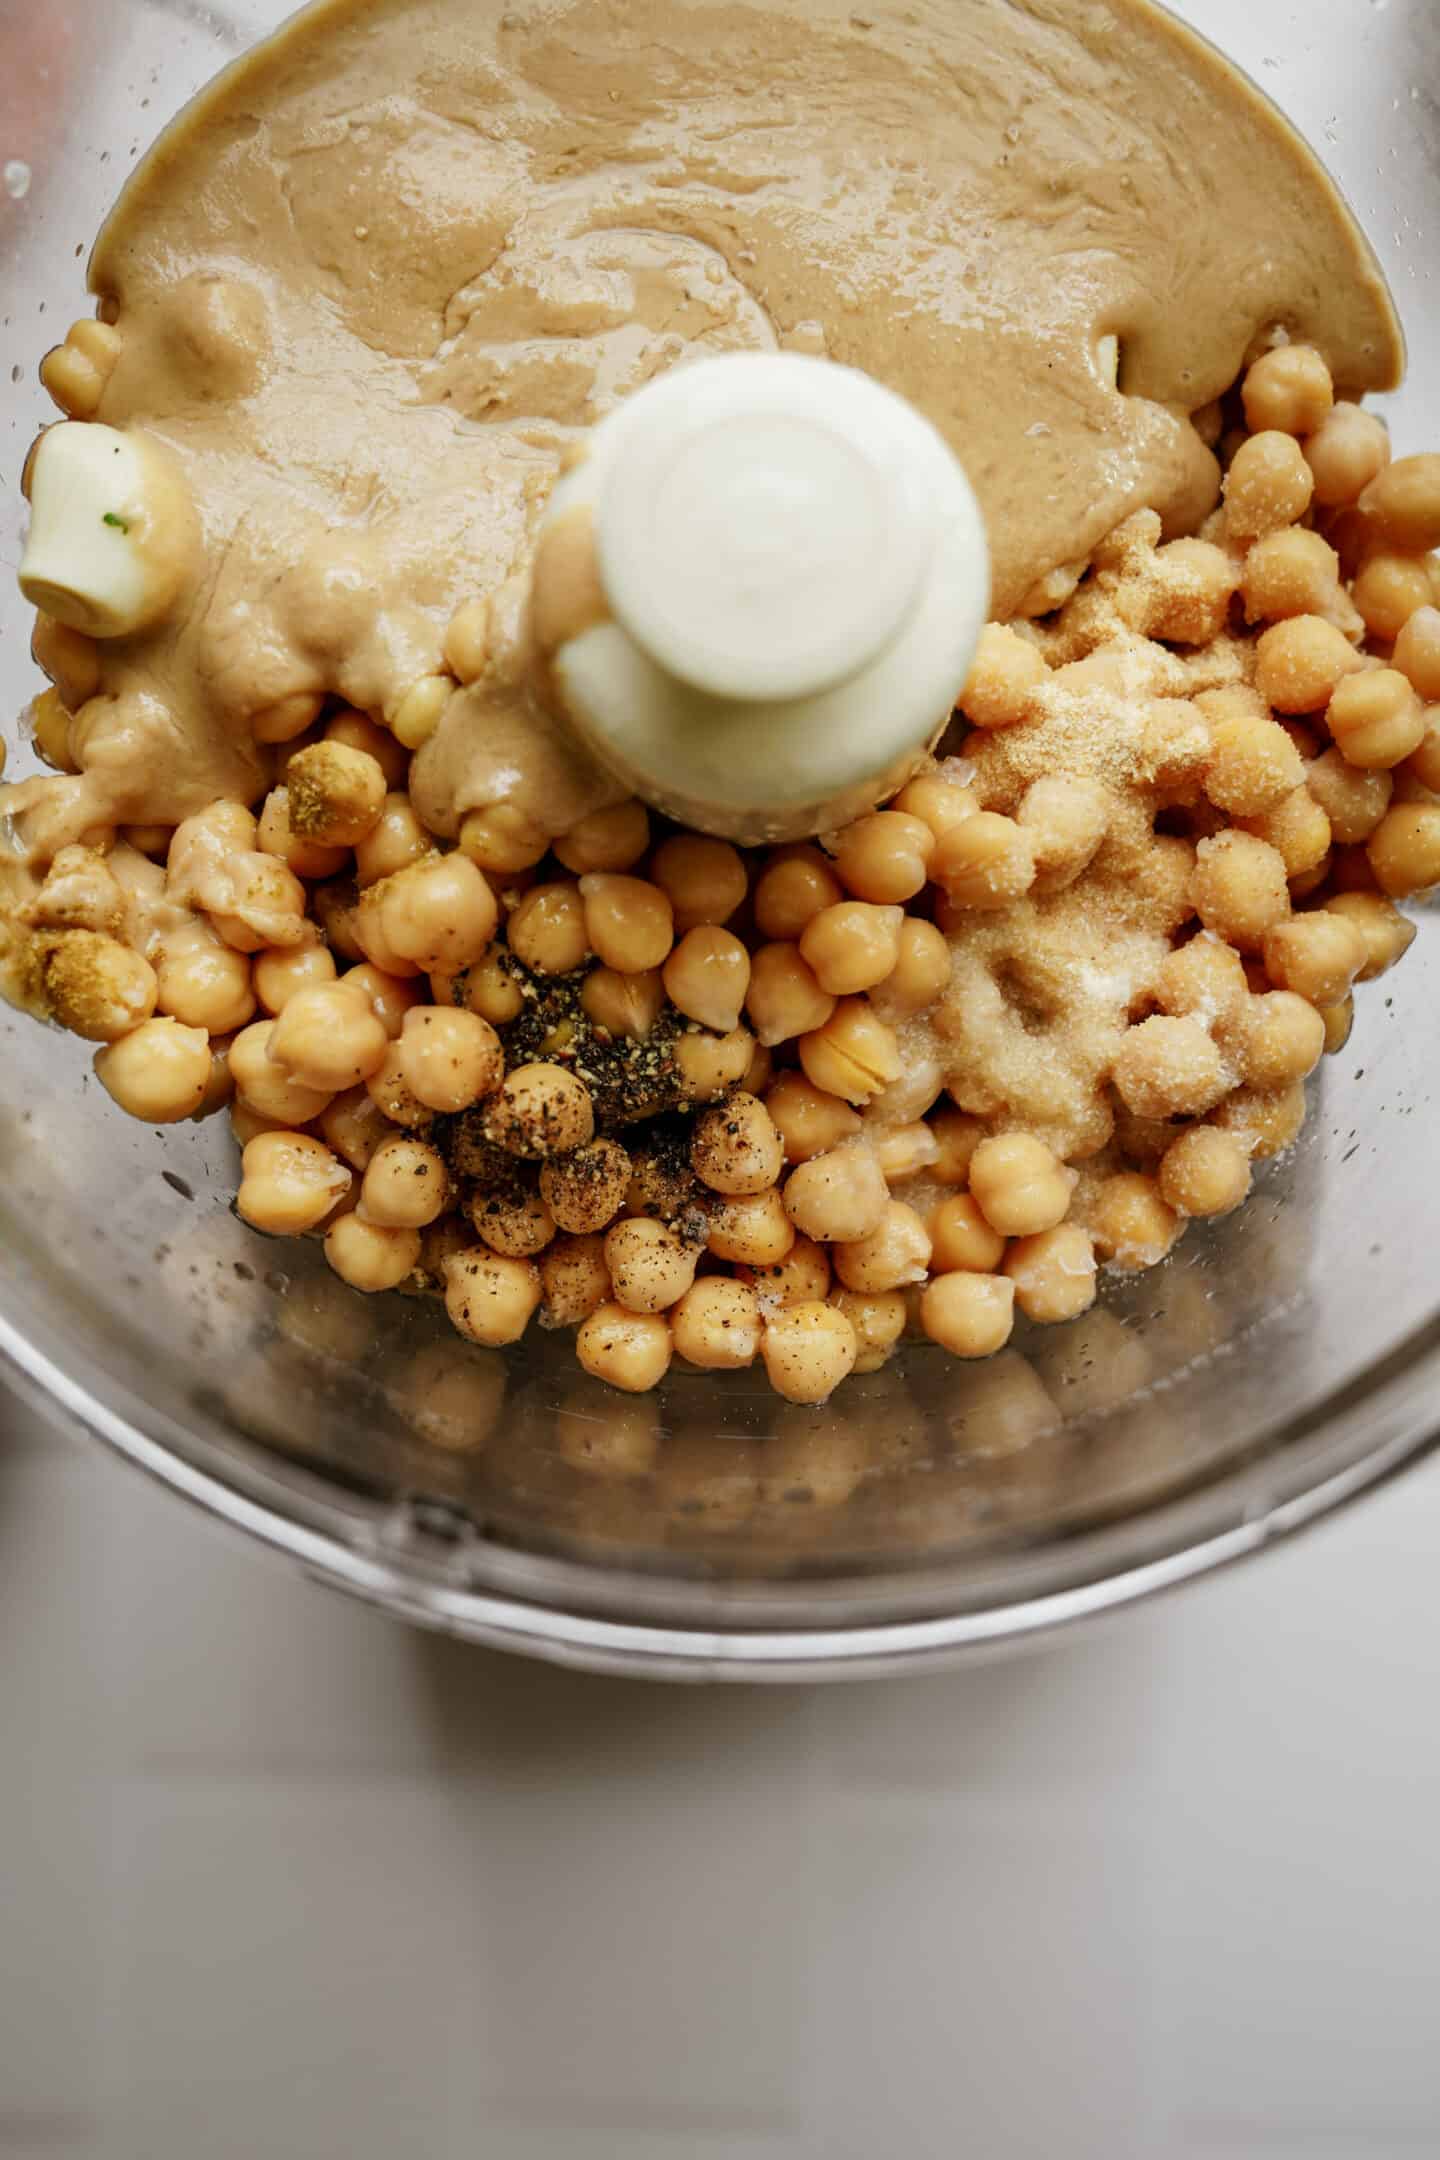 Ingredients for hummus in a food processor